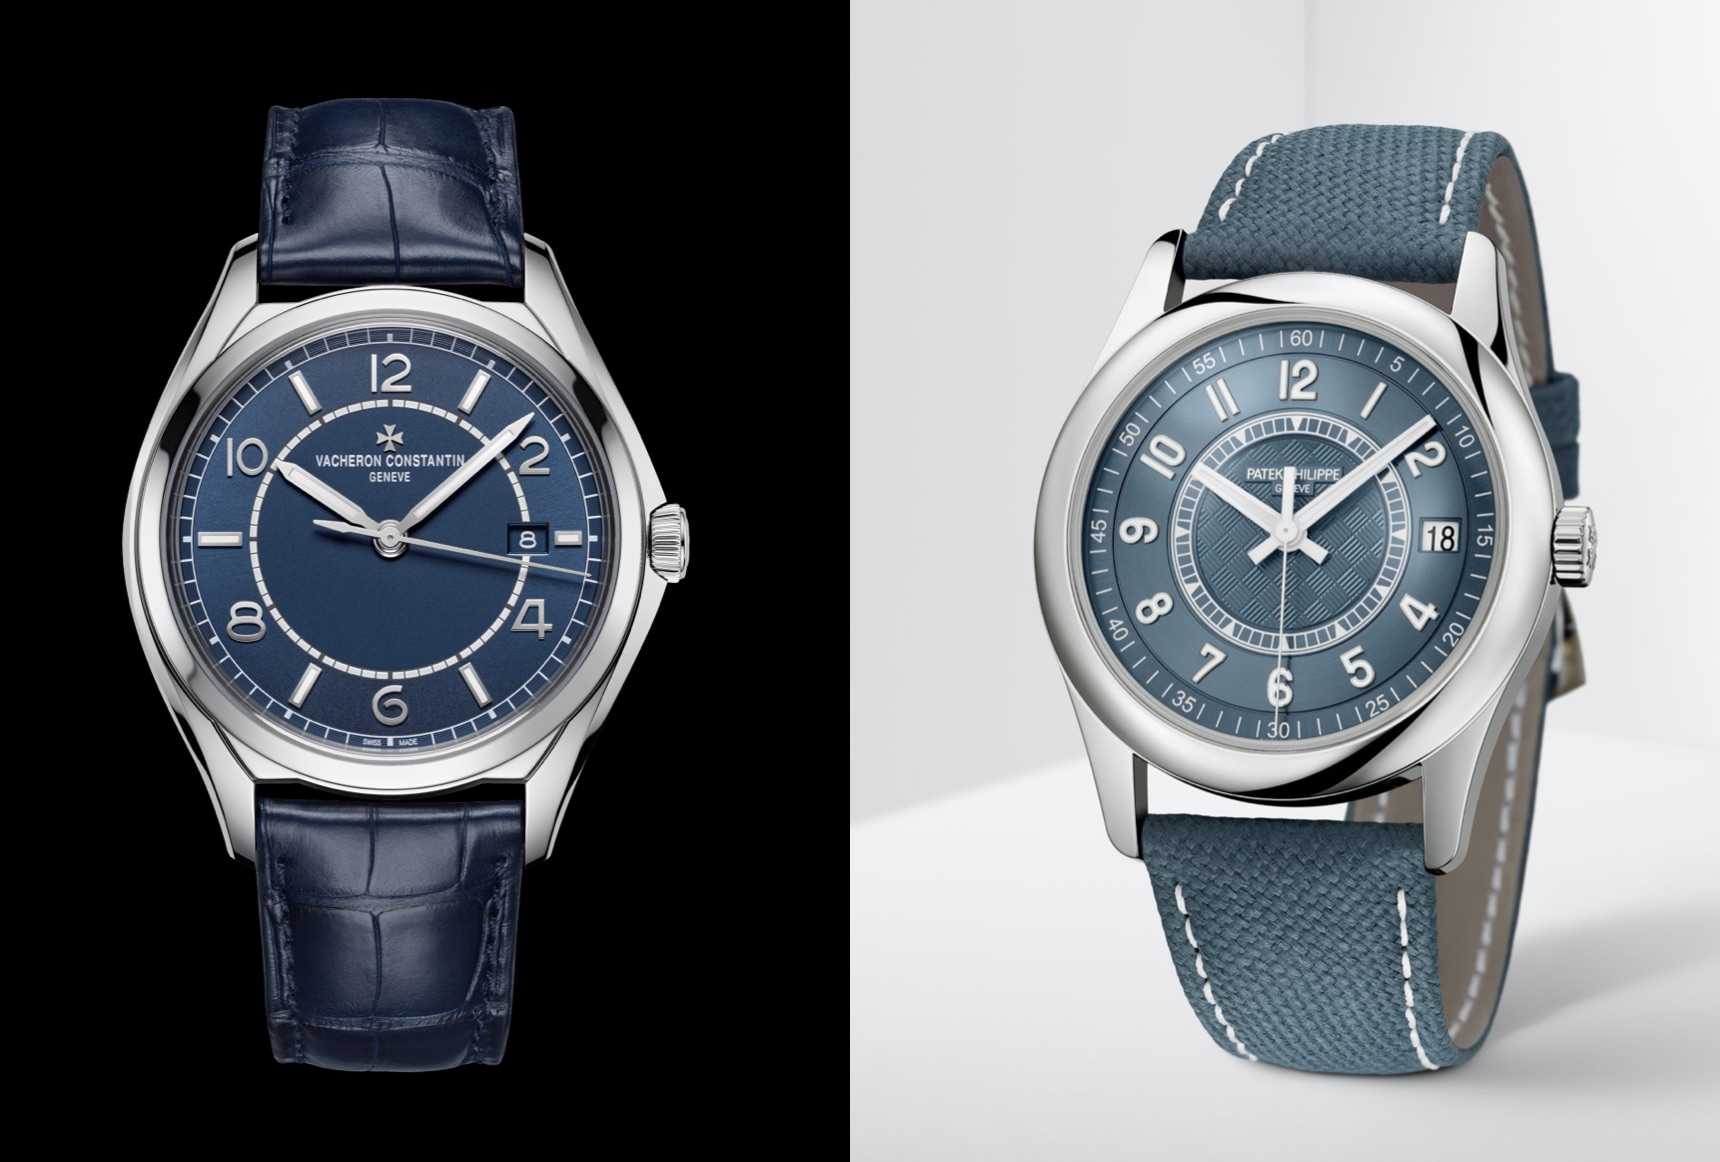 A design that divides – the Patek Philippe Calatrava Ref.6007A-001 meets its lookalikes head on